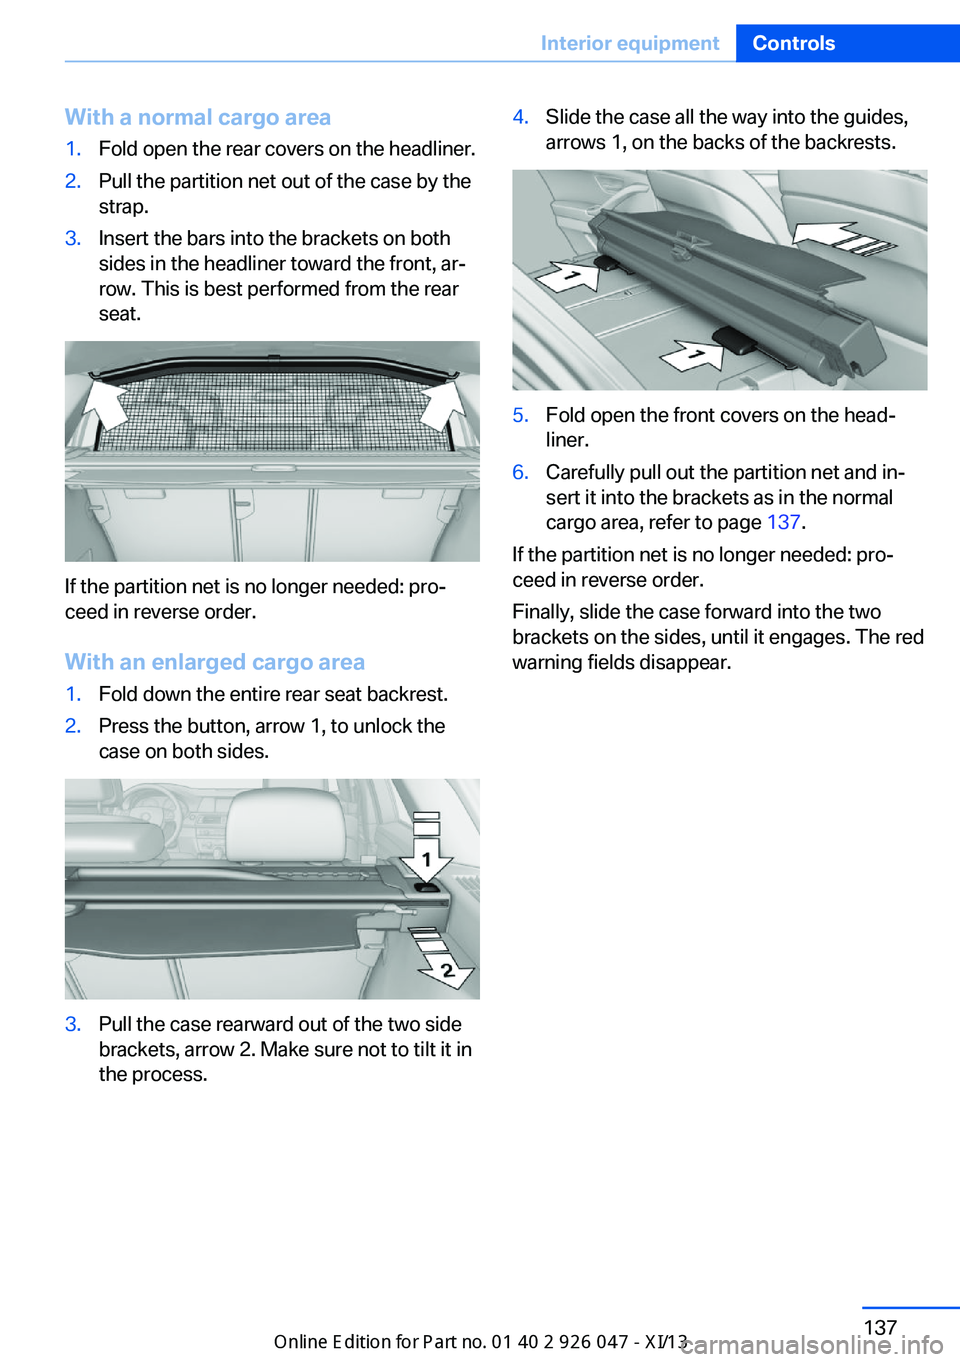 BMW X3 2013 F25 User Guide With a normal cargo area1.Fold open the rear covers on the headliner.2.Pull the partition net out of the case by the
strap.3.Insert the bars into the brackets on both
sides in the headliner toward the